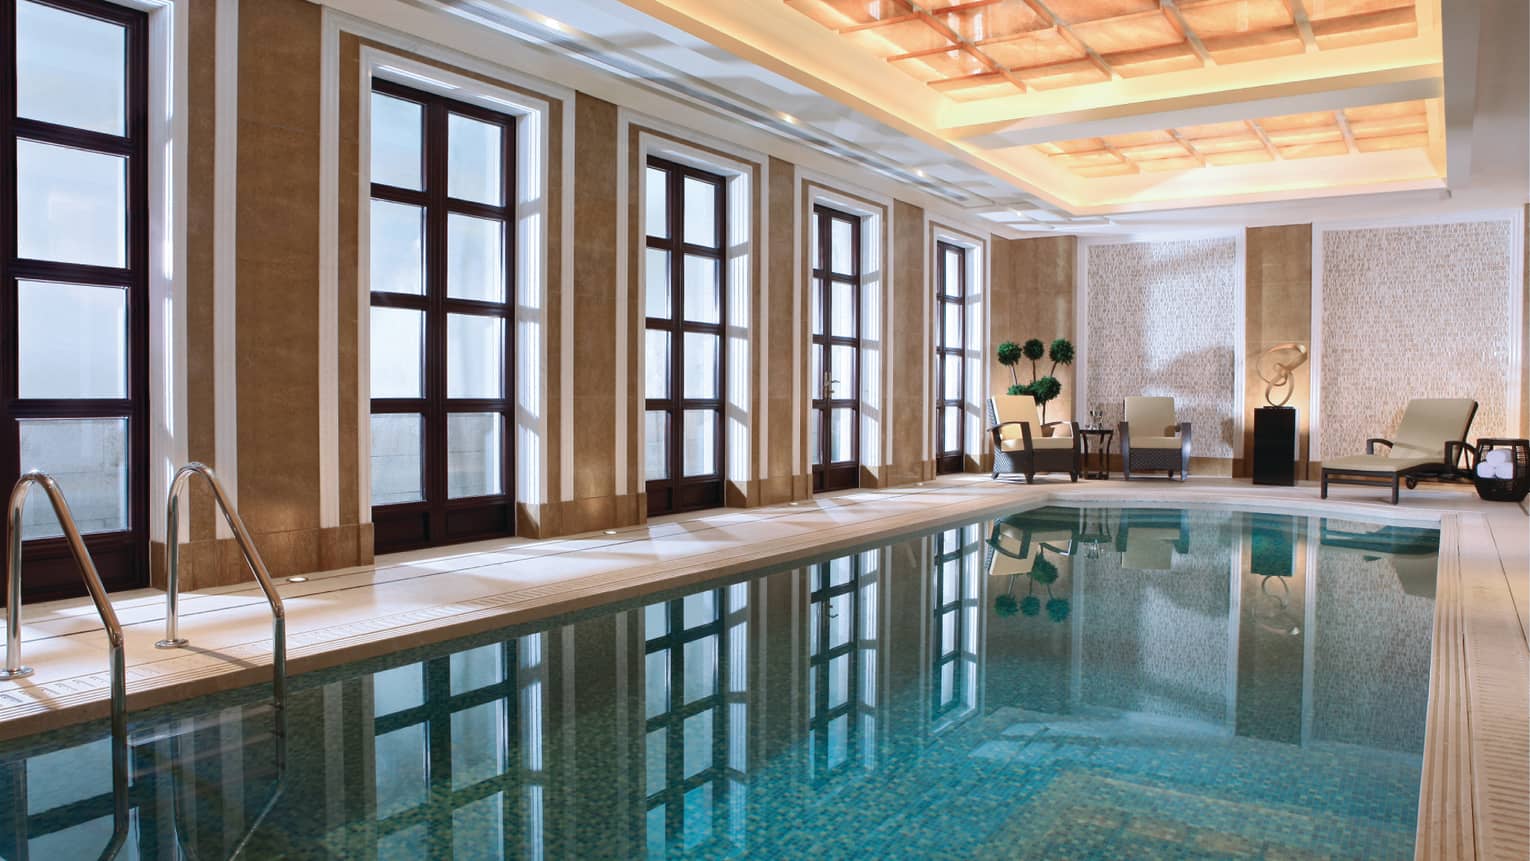 Floor-to-ceiling windows reflecting on long indoor swimming pool